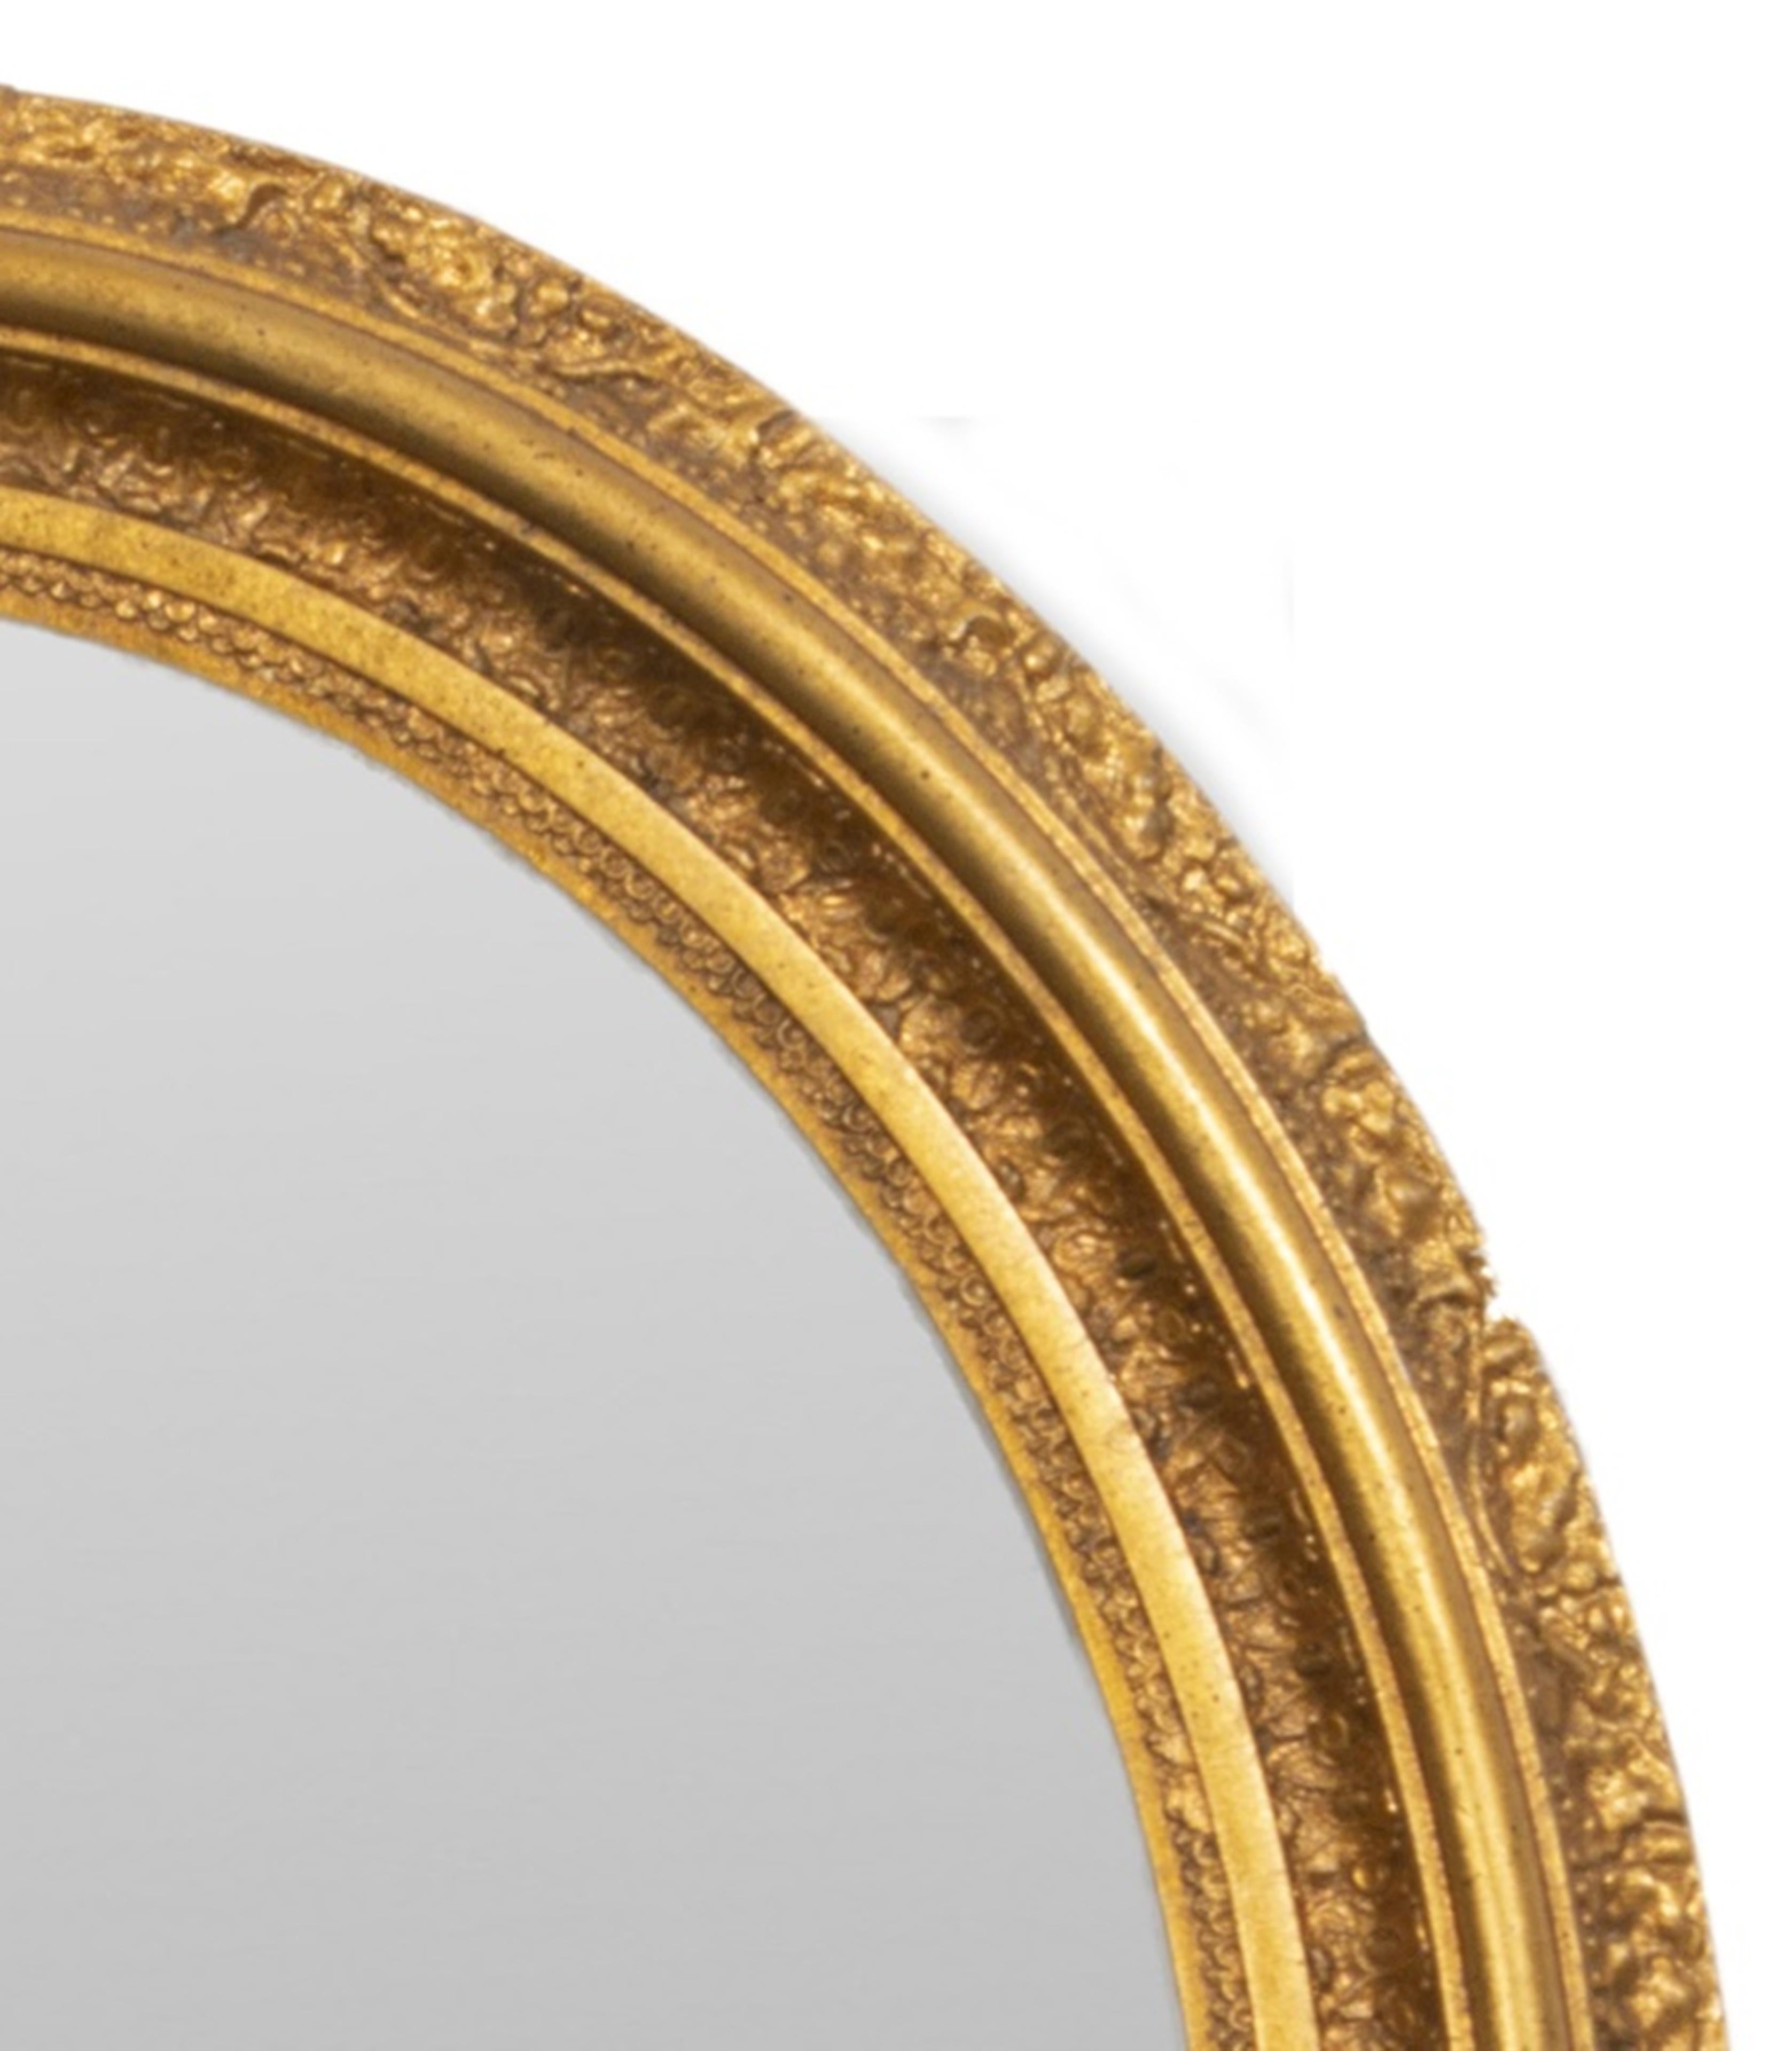 Rococo revival oval giltwood mirror. Provenance: Property from a 1199 Park Ave estate
Dimensions 30.5” H x 26.5” W x 2” D.

Dealer S138XX.